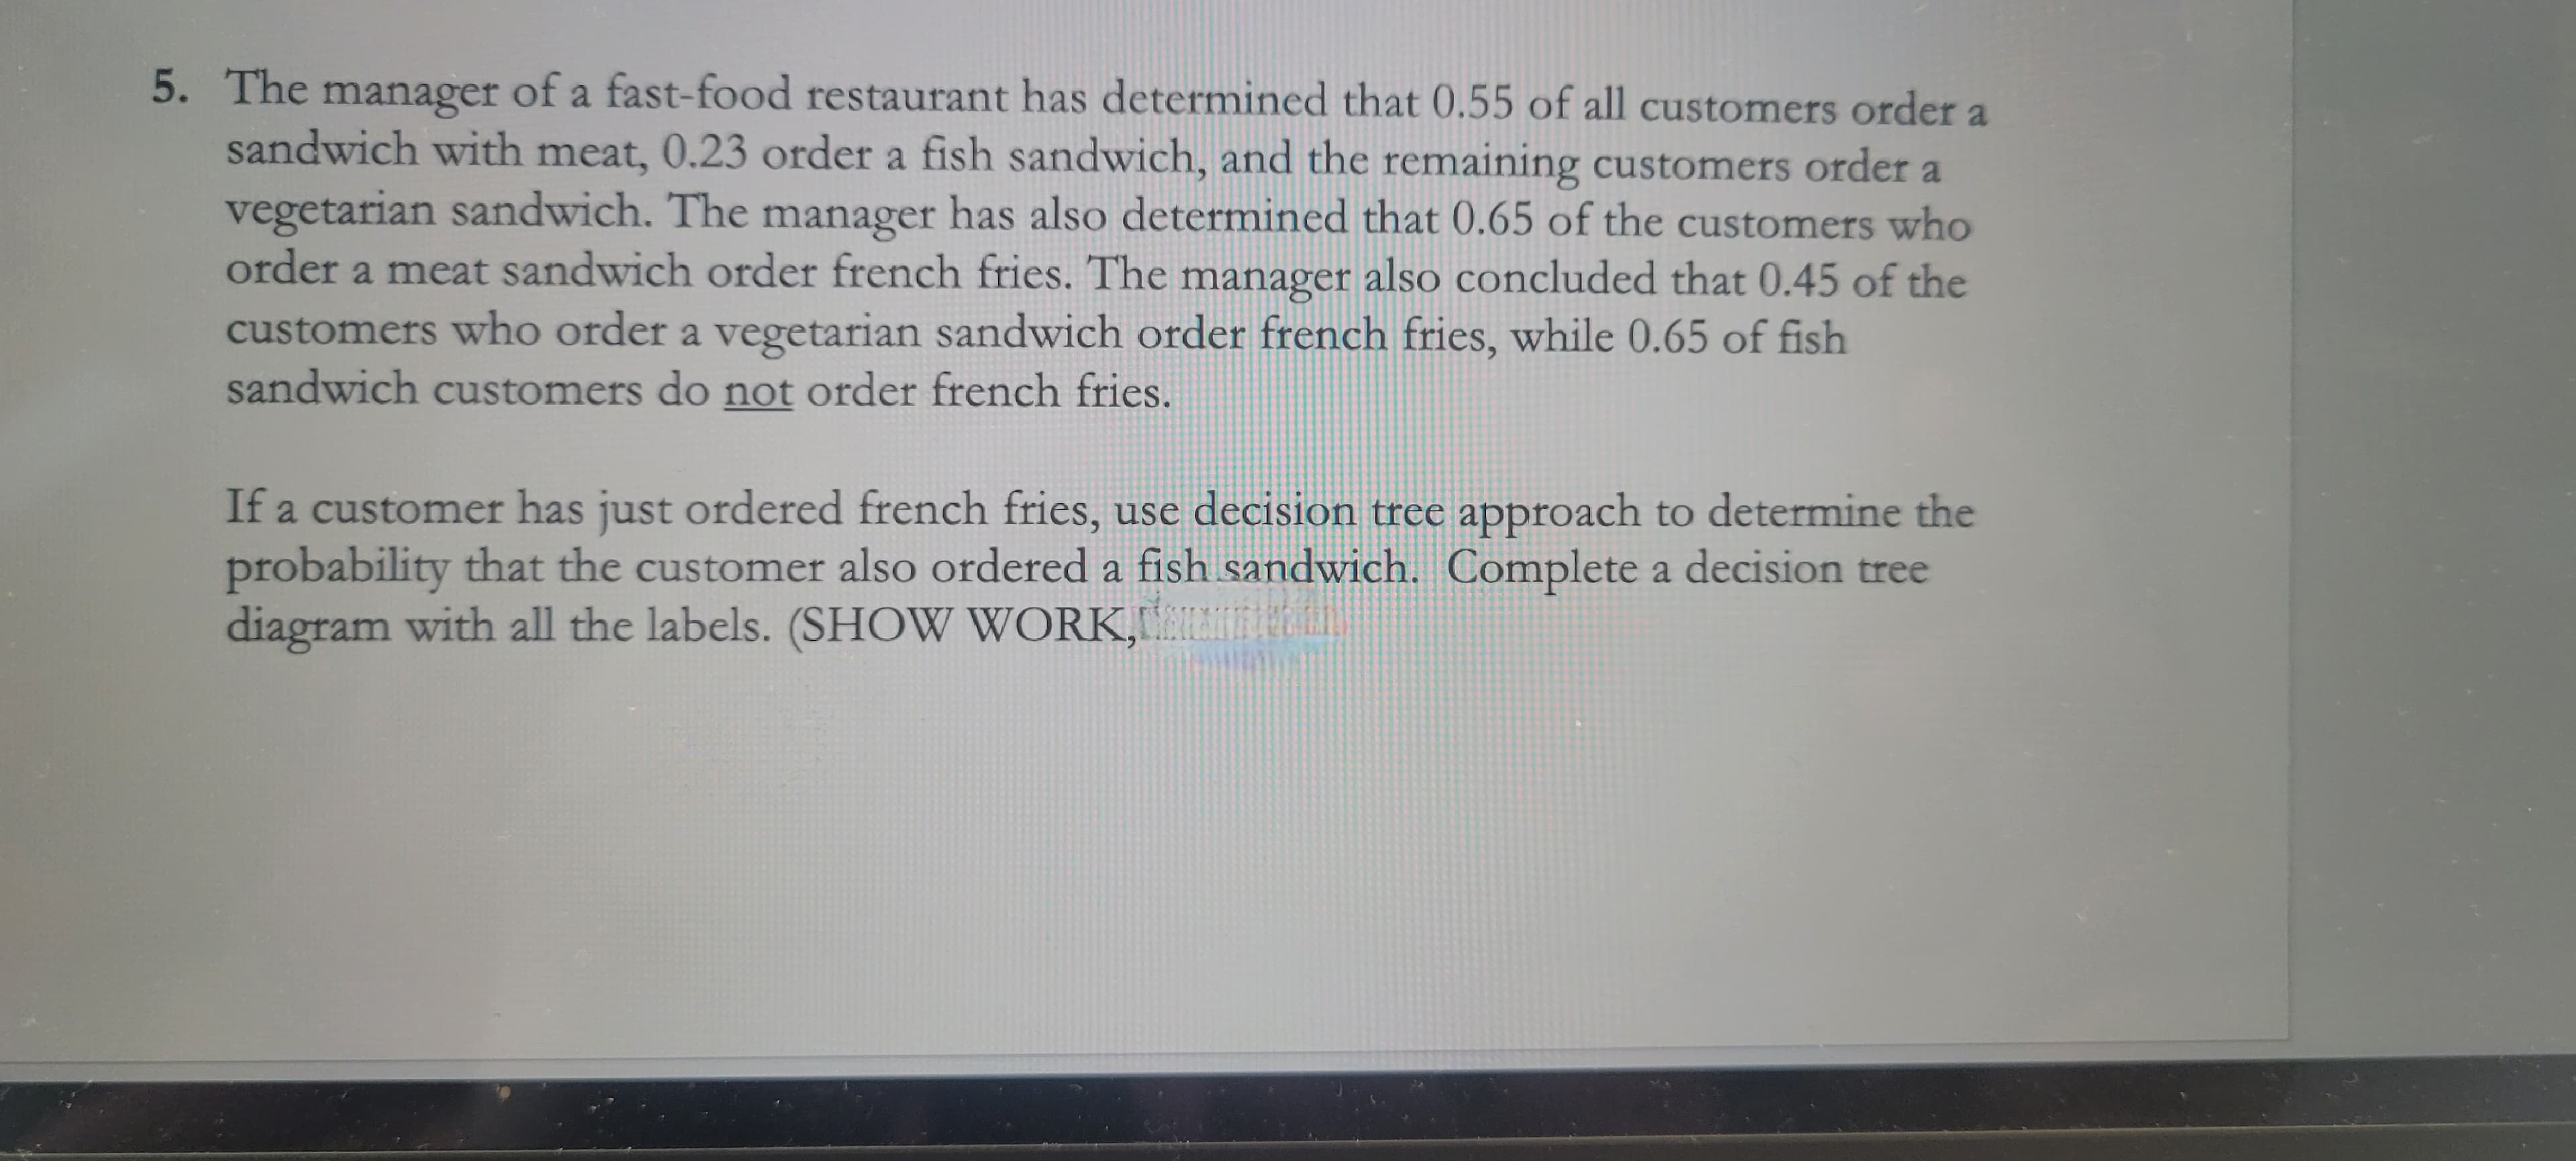 5. The manager of a fast-food restaurant has determined that 0.55 of all customers order a
sandwich with meat, 0.23 order a fish sandwich, and the remaining customers order a
vegetarian sandwich. The manager has also determined that 0.65 of the customers who
order a meat sandwich order french fries. The manager also concluded that 0.45 of the
customers who order a vegetarian sandwich order french fries, while 0.65 of fish
sandwich customers do not order french fries.
If a customer has just ordered french fries, use decision tree approach to determine the
probability that the customer also ordered a fish sandwich. Complete a decision tree
diagram with all the labels. (SHOW WORK, THE LI